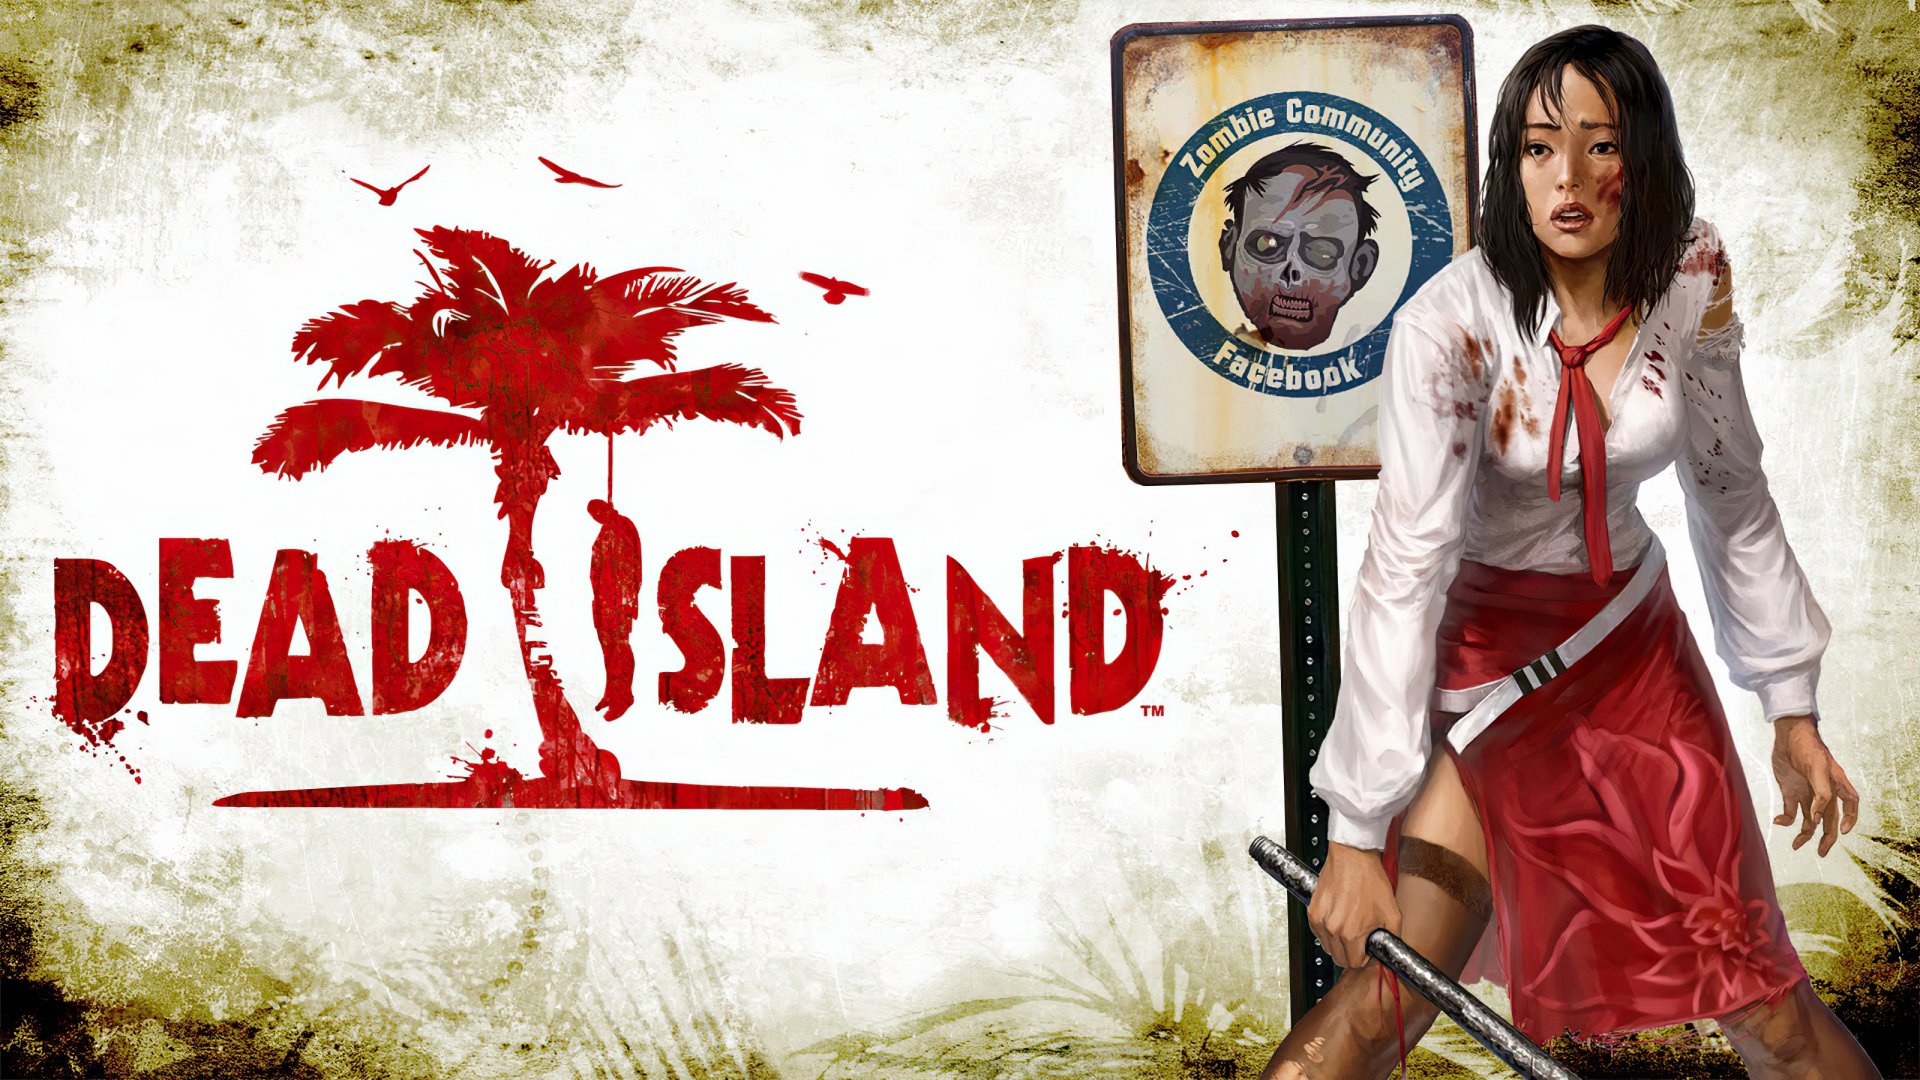 xbox one scary games dead island 2 xbox one